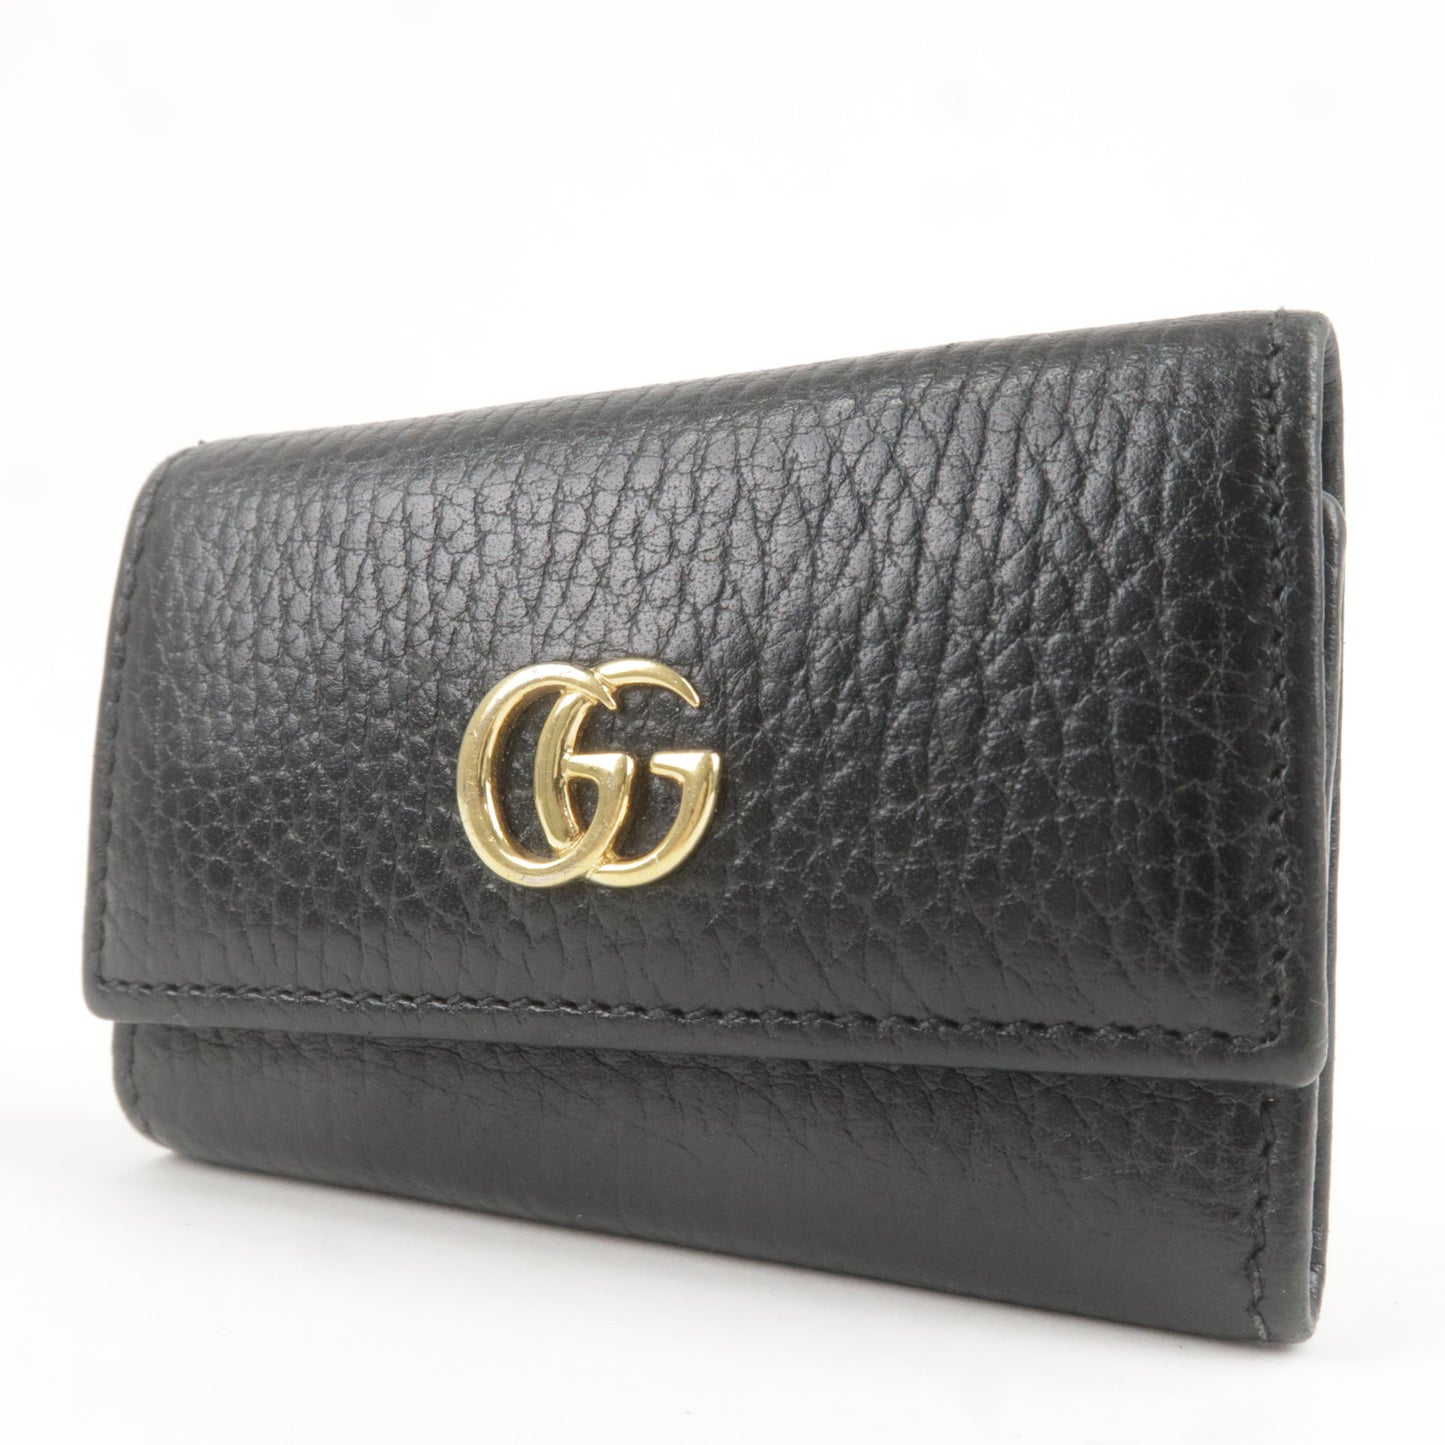 GG Marmont leather key case